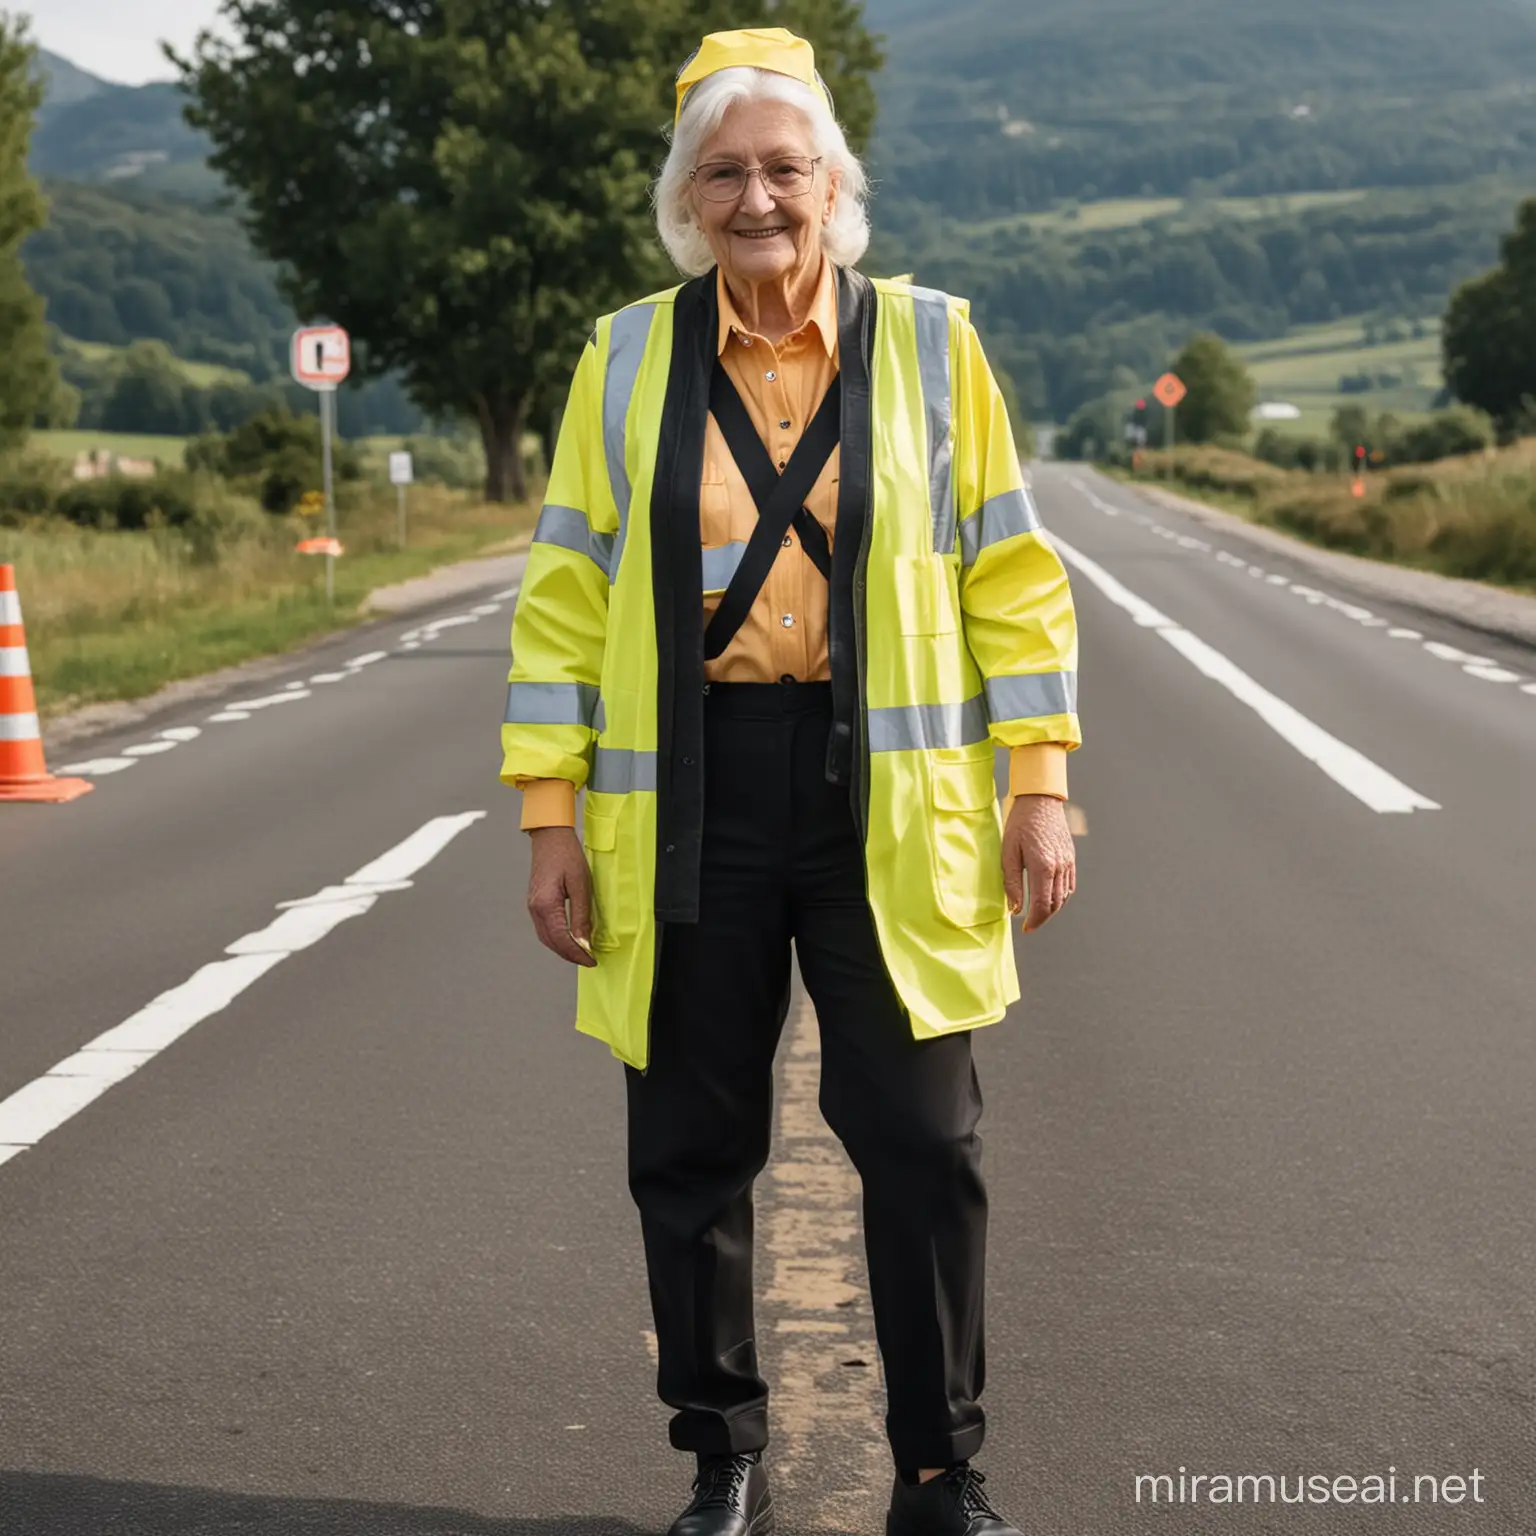 Reflective Garment for Elderly Road Crossing Safety Assistance